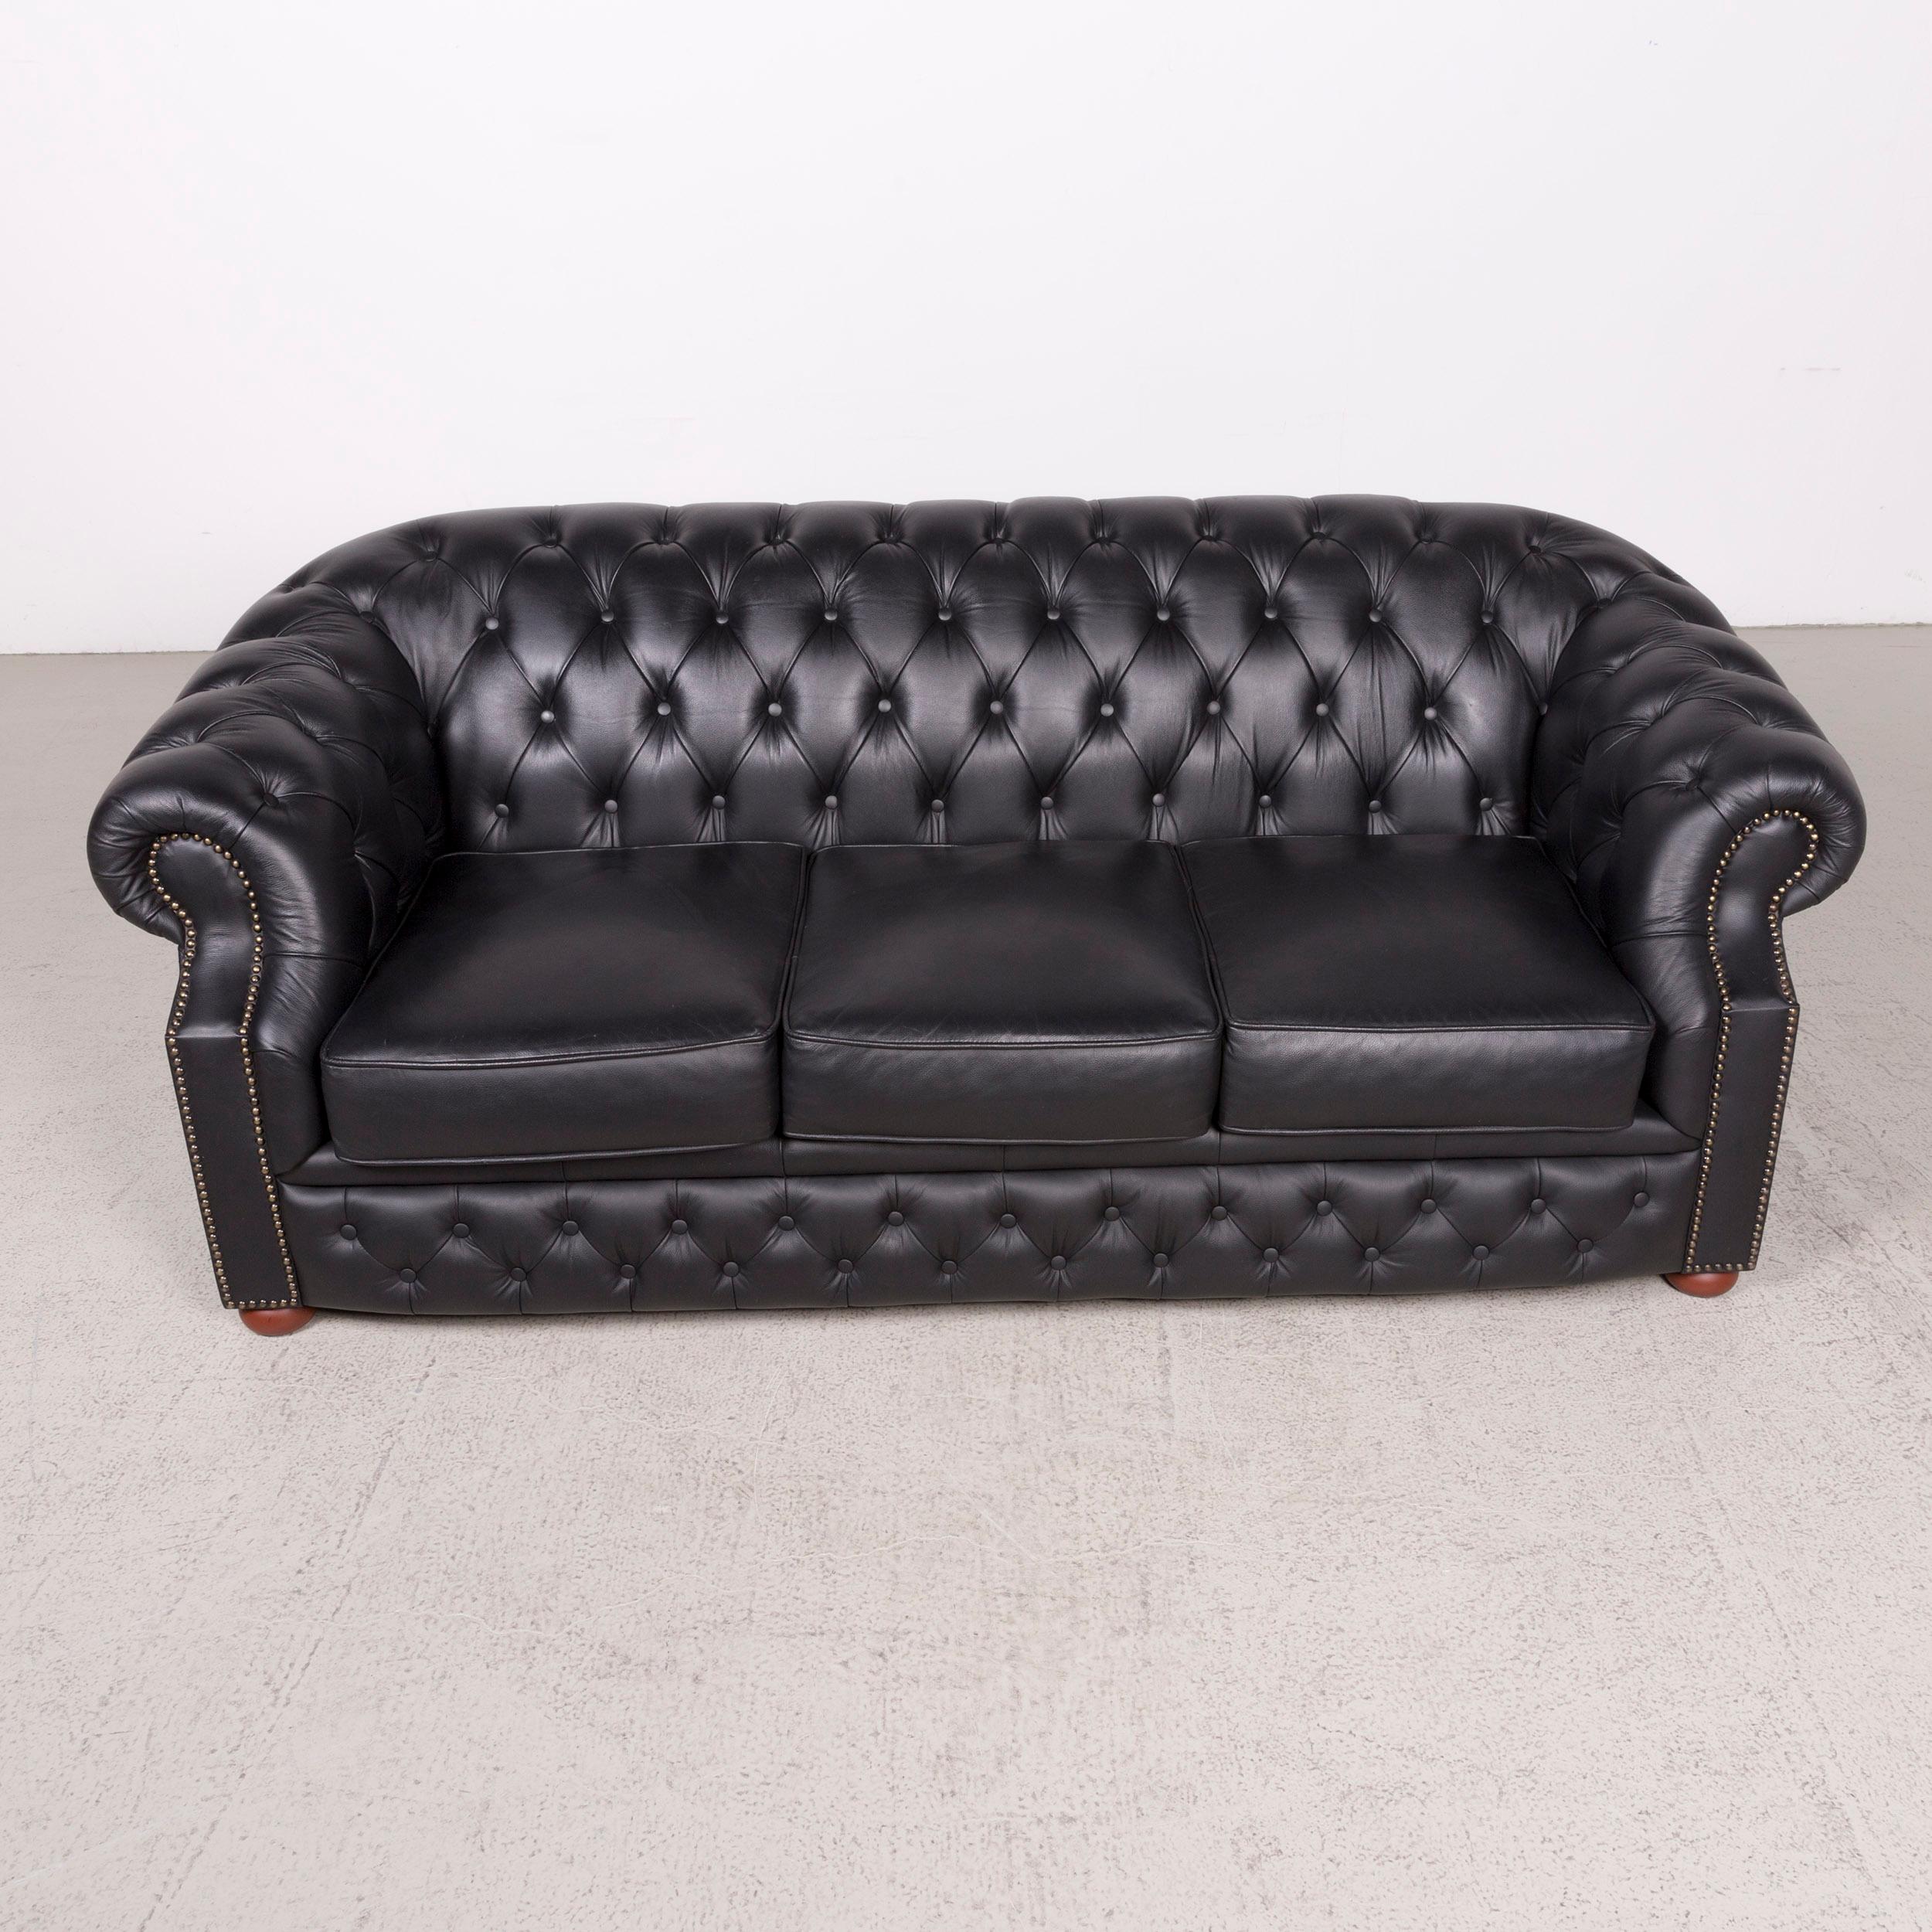 Modern Chesterfield Designer Leather Sofa Black Three-Seater Real Leather Couch Retro For Sale